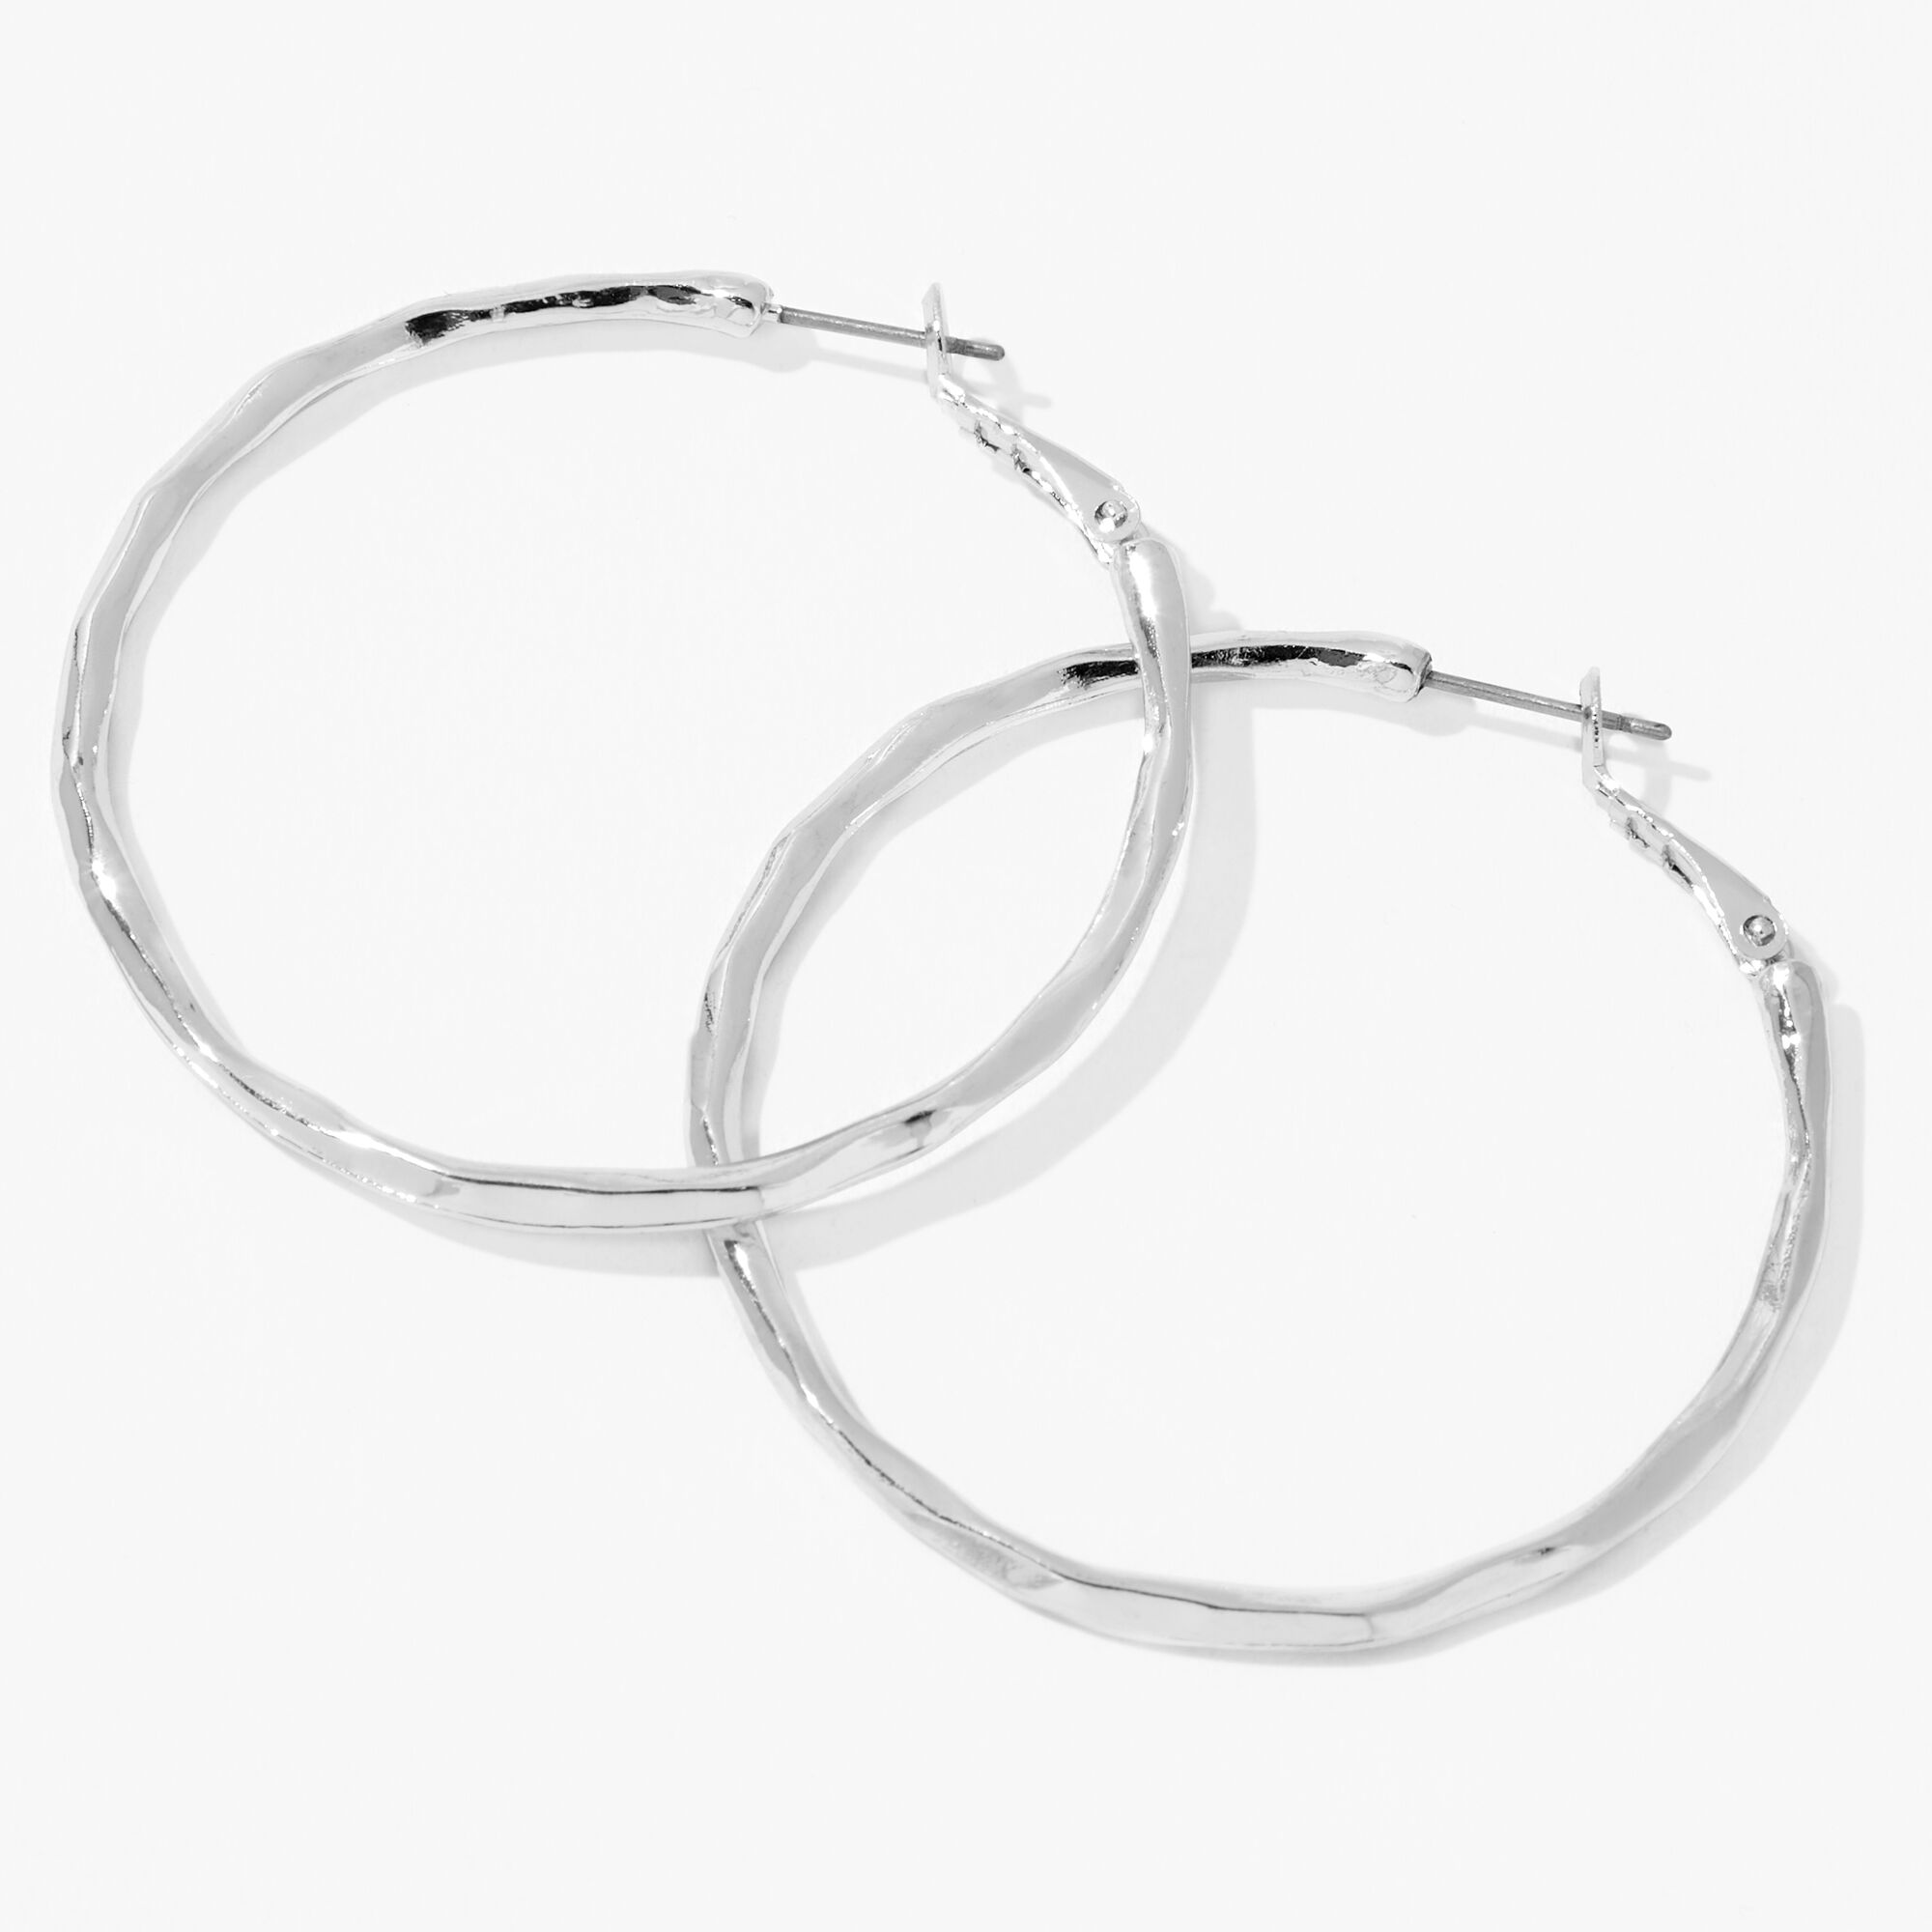 View Claires 60MM Molten Hoop Earrings Silver information